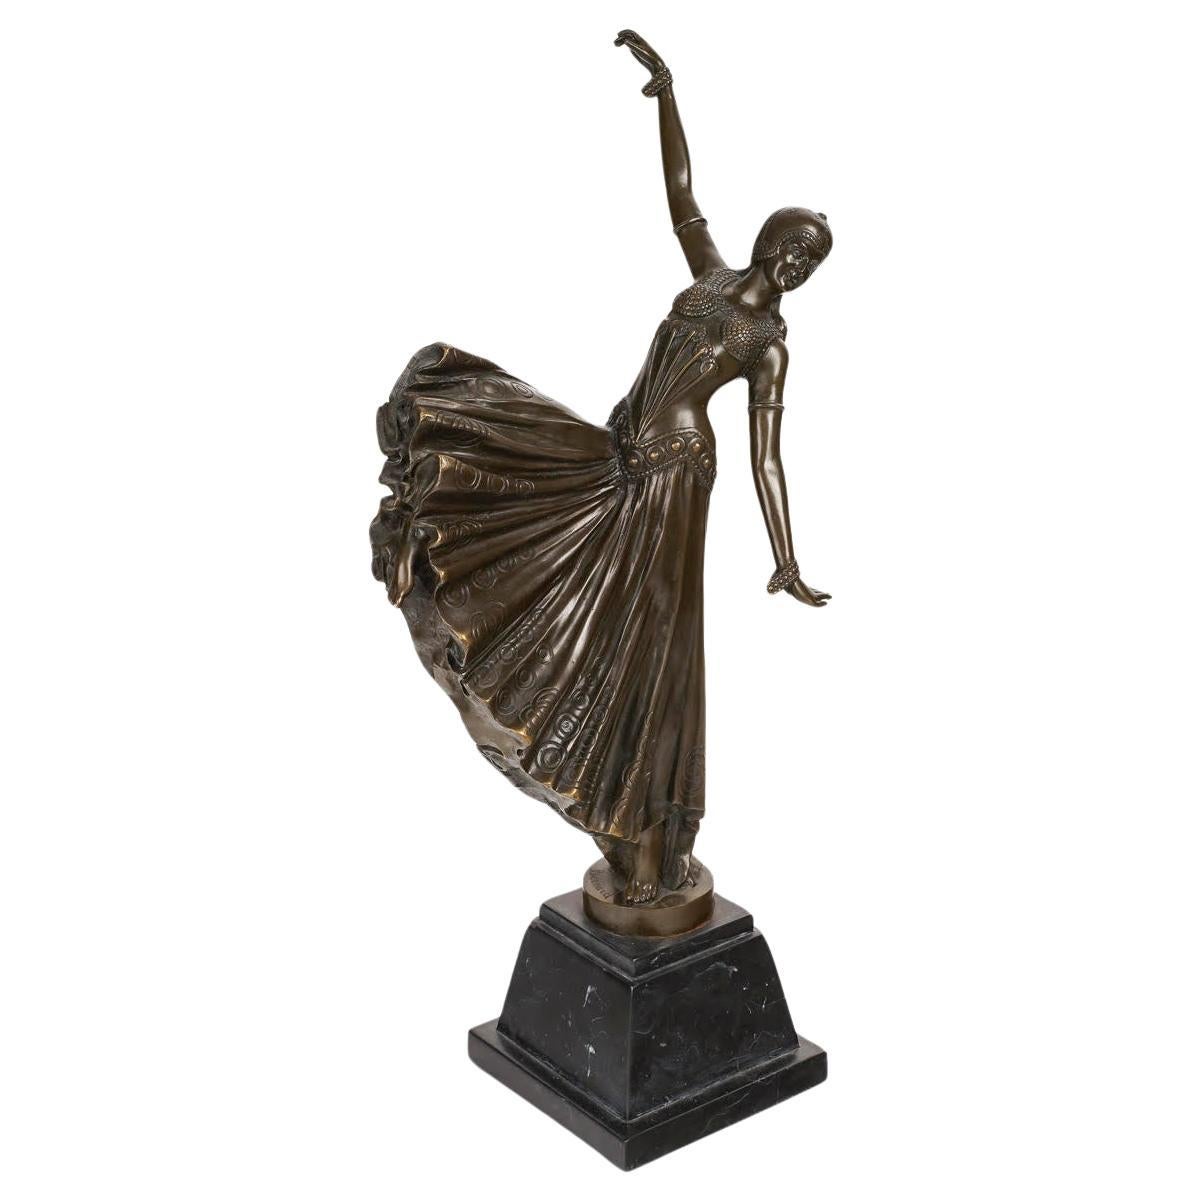 Sculpture of an Art Deco style Dancer in Bronze on a Marble Base, 20th Century. For Sale